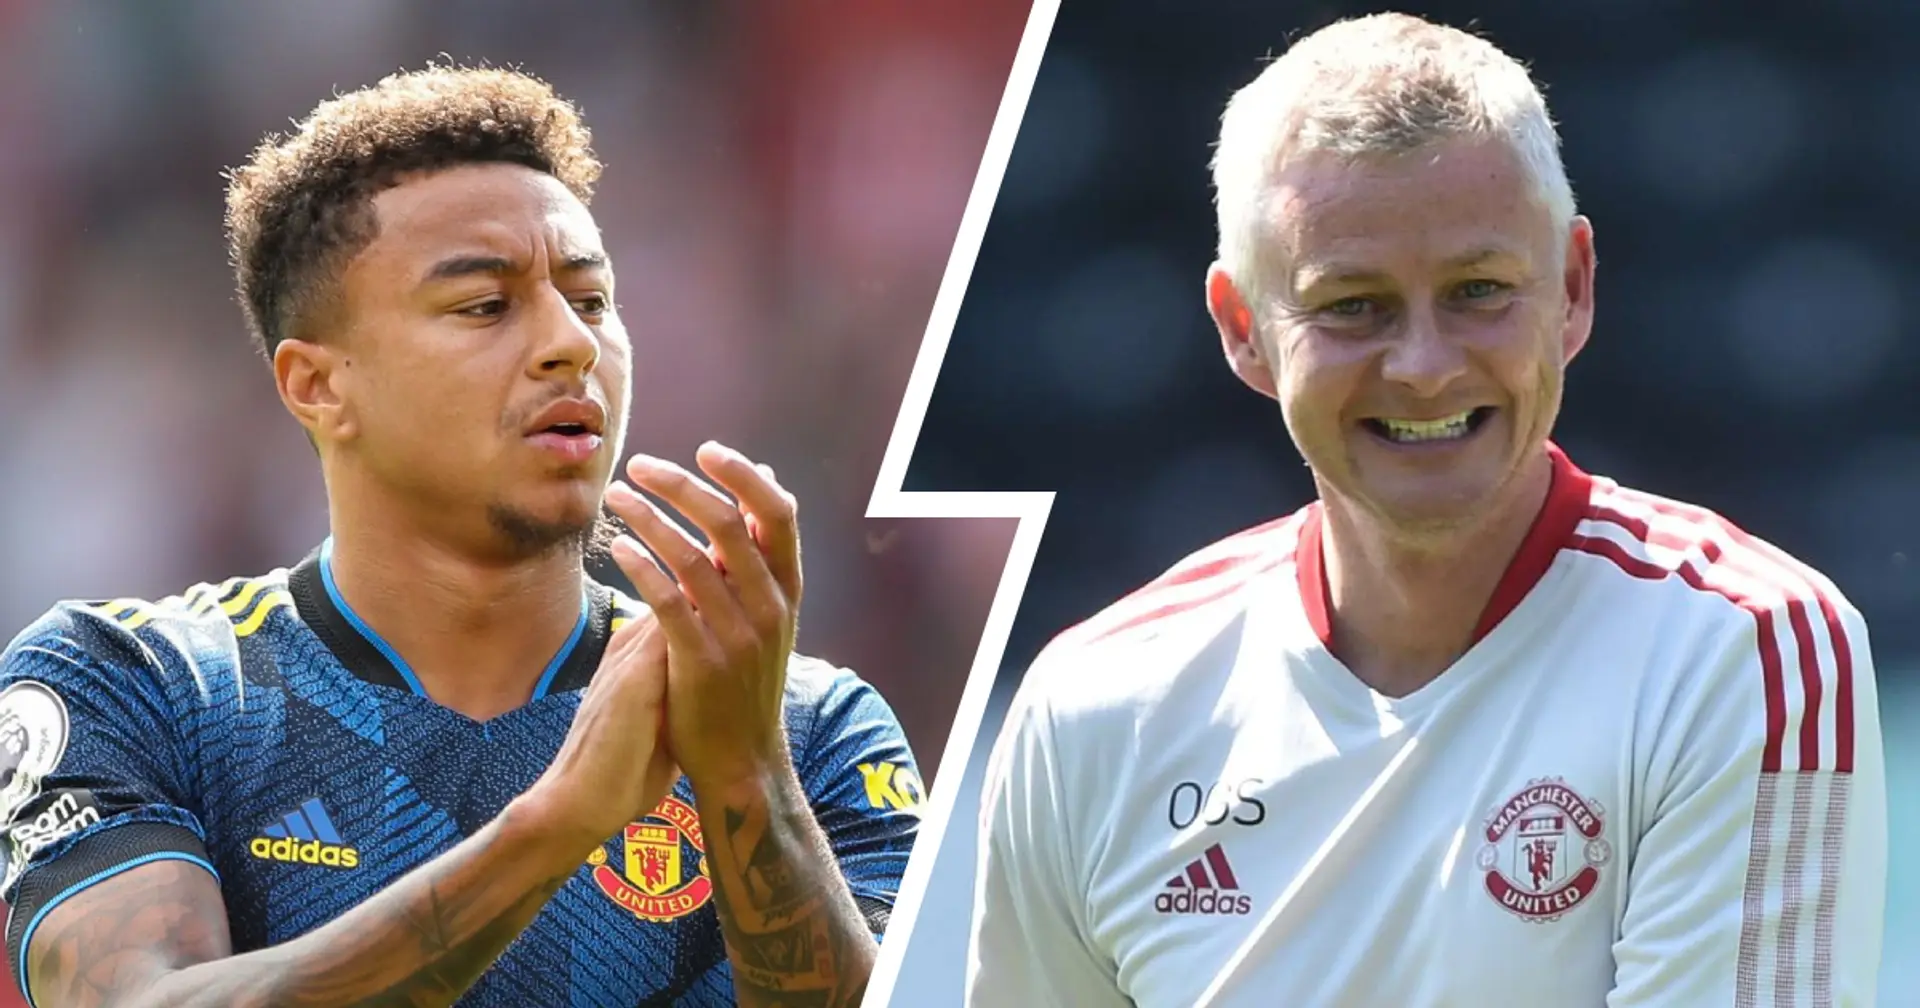 Lingard to West Ham & 4 more Old Trafford transfer rumours you should believe the least